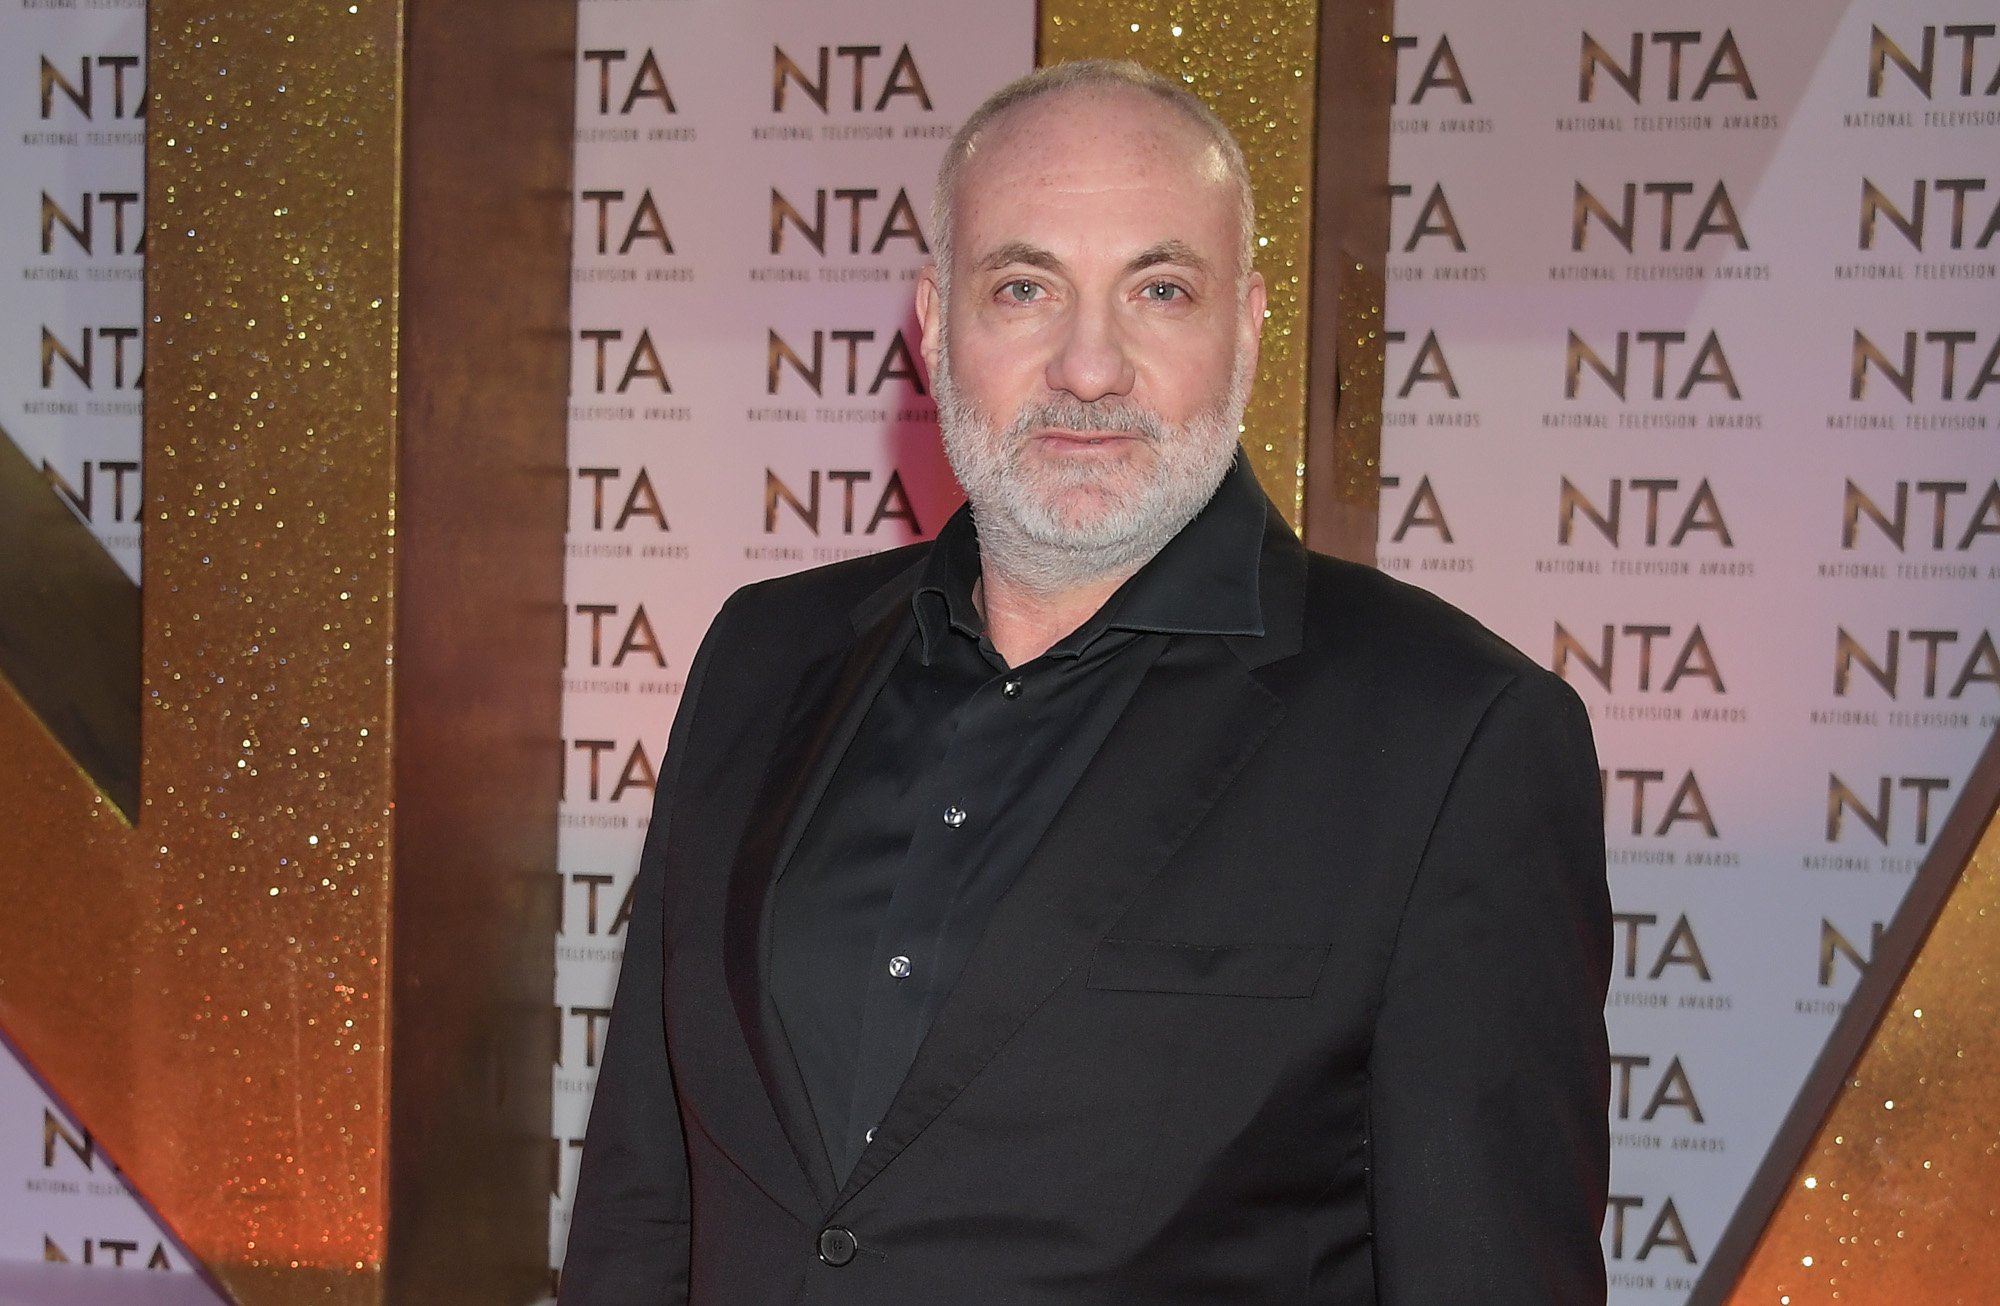 'The Witcher' Season 2 star Kim Bodnia, who will play Vesemir in the new episodes. He's wearing a black suit, and the National Television Awards logo is on the wall behind him.